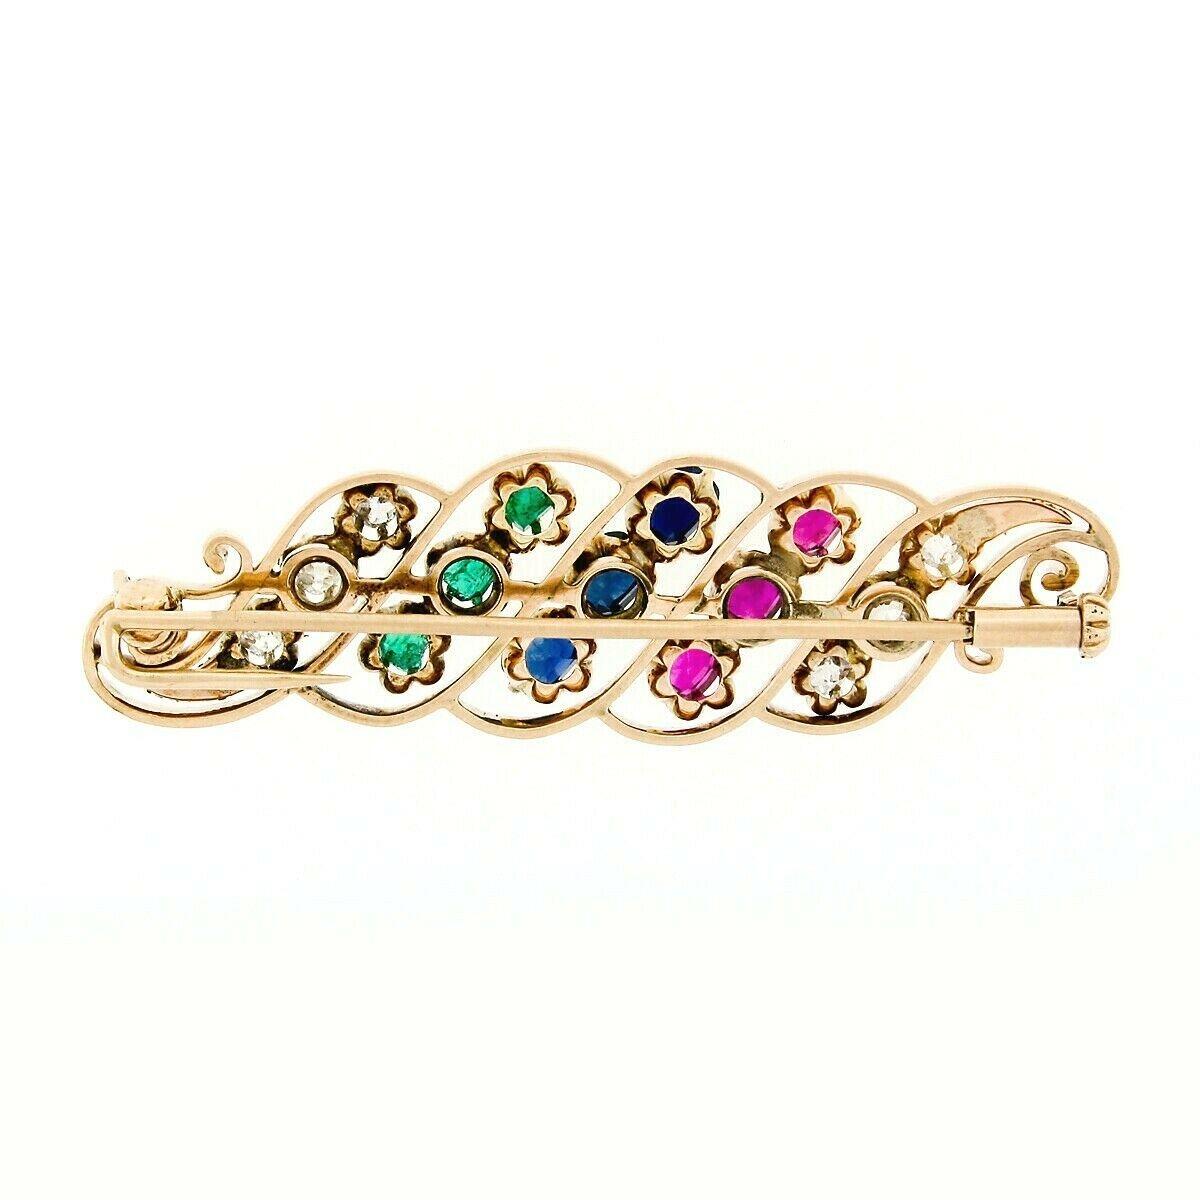 Antique Arts & Crafts 14k Gold GIA Sapphire Ruby & Emerald Swirl Leaf Brooch Pin In Good Condition For Sale In Montclair, NJ